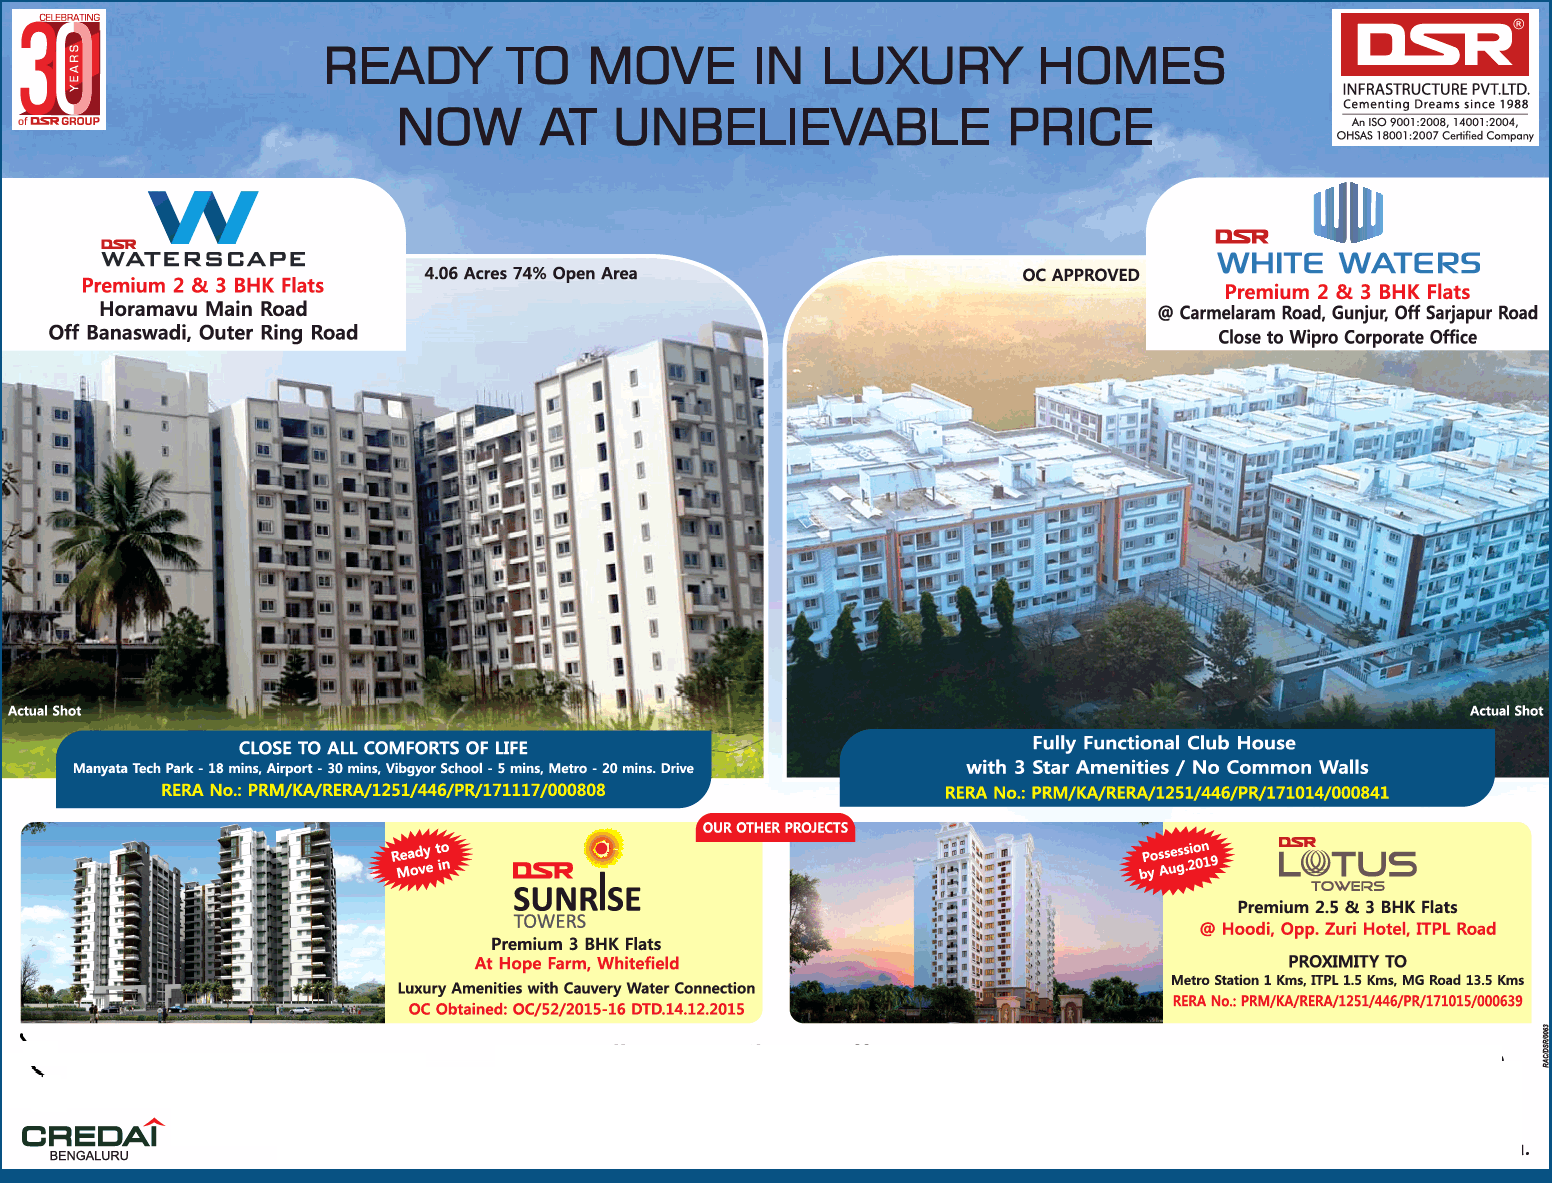 Ready to move in luxury homes now at unbelievable price by DSR Infrastructure, Bangalore